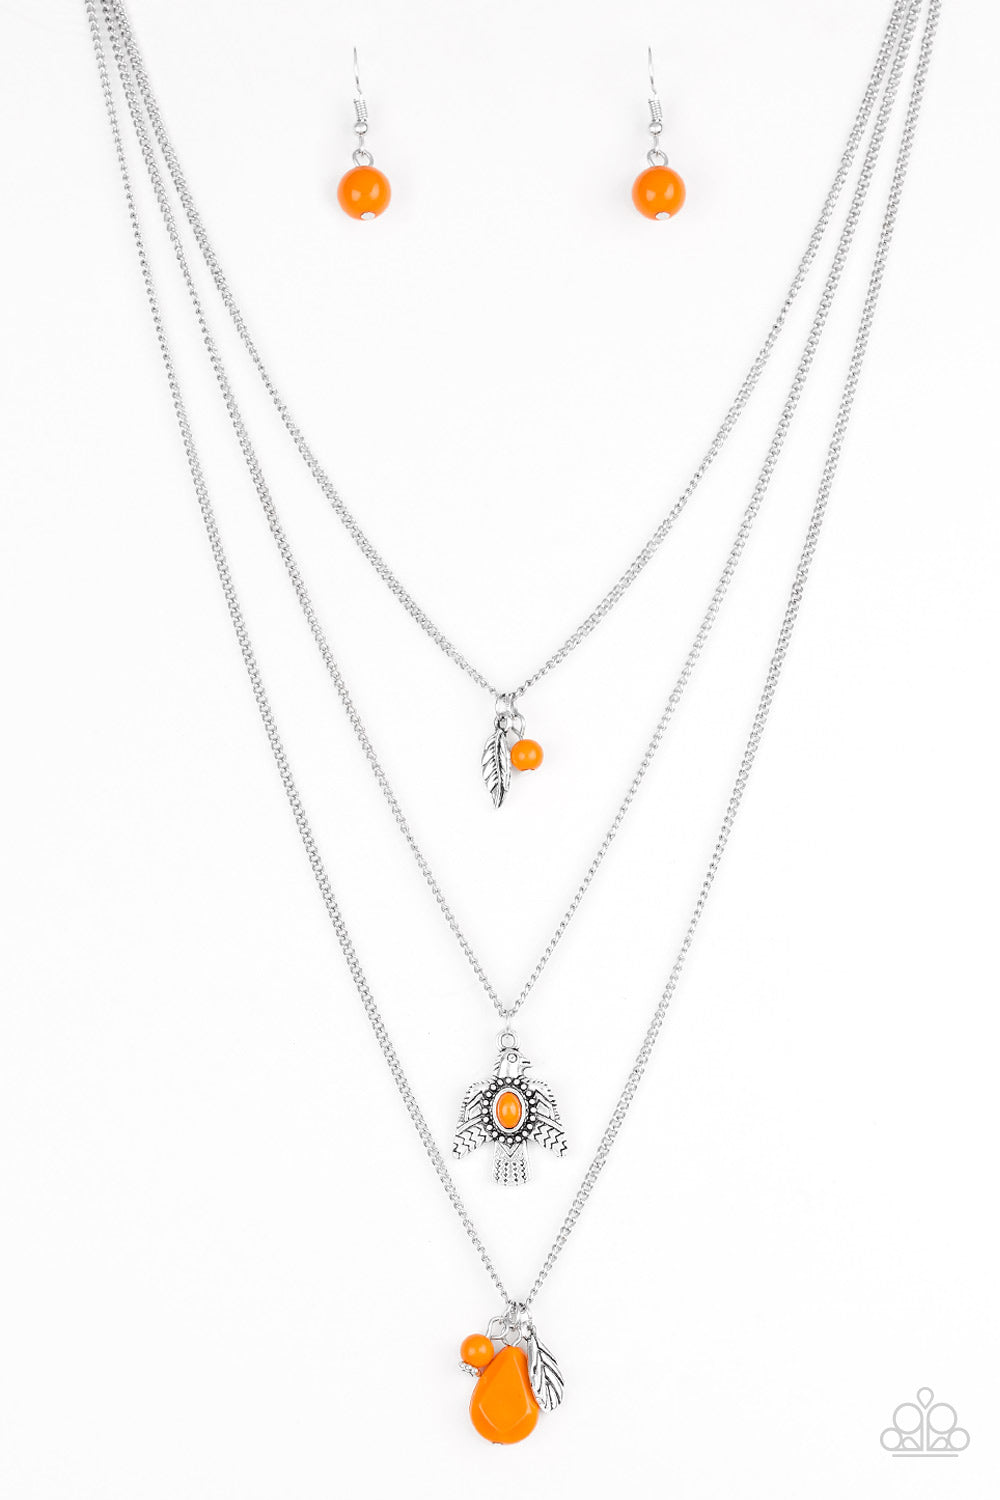 Soar With The Eagles - Orange - Paparazzi Necklace